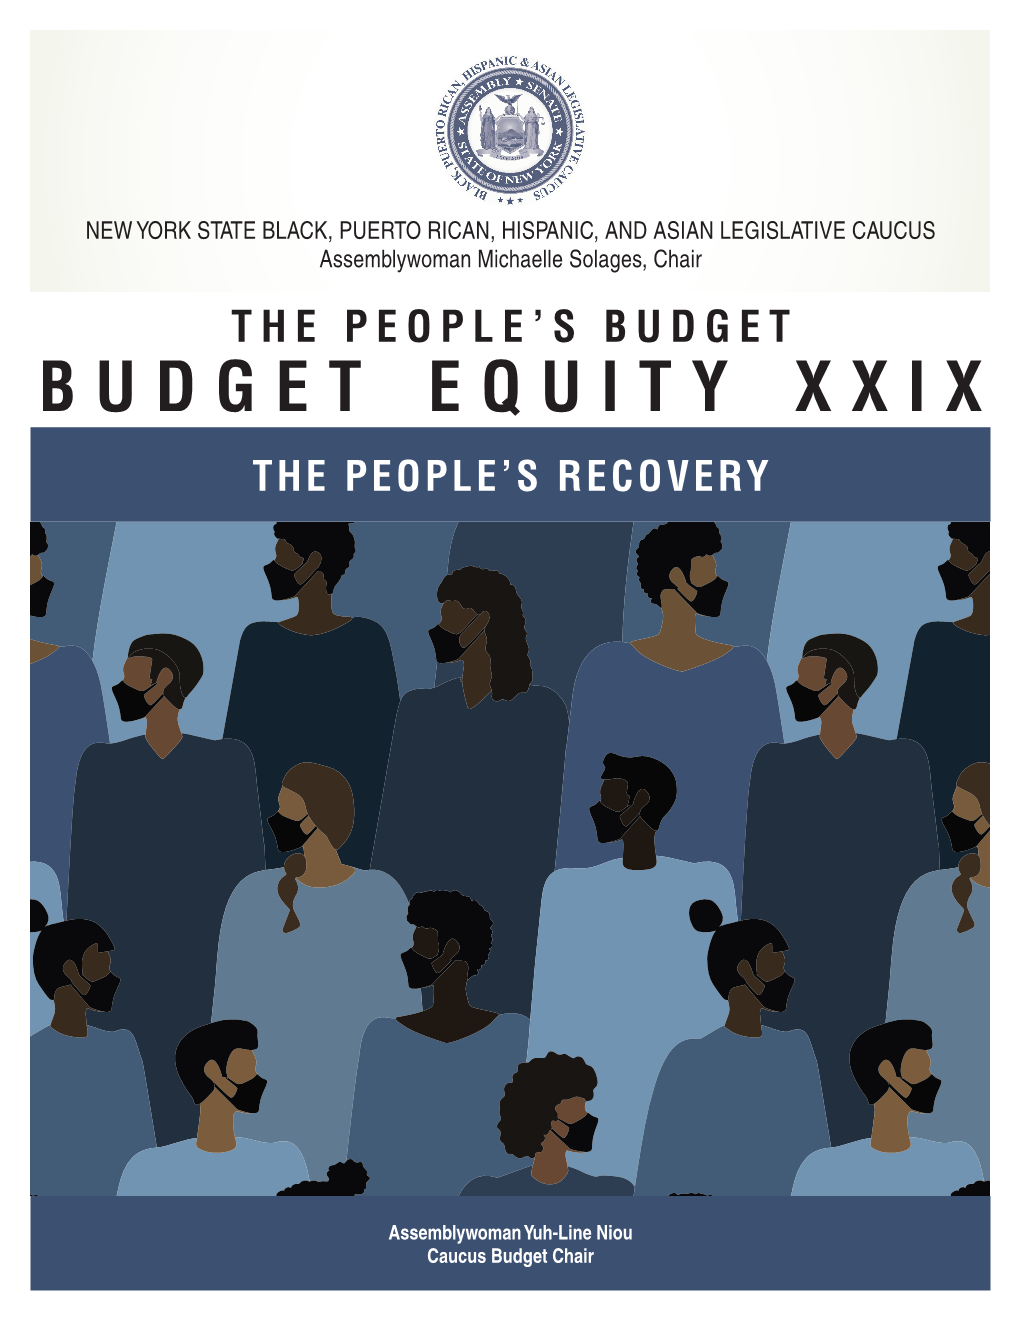 Budget Equity Xxix the People’S Recovery